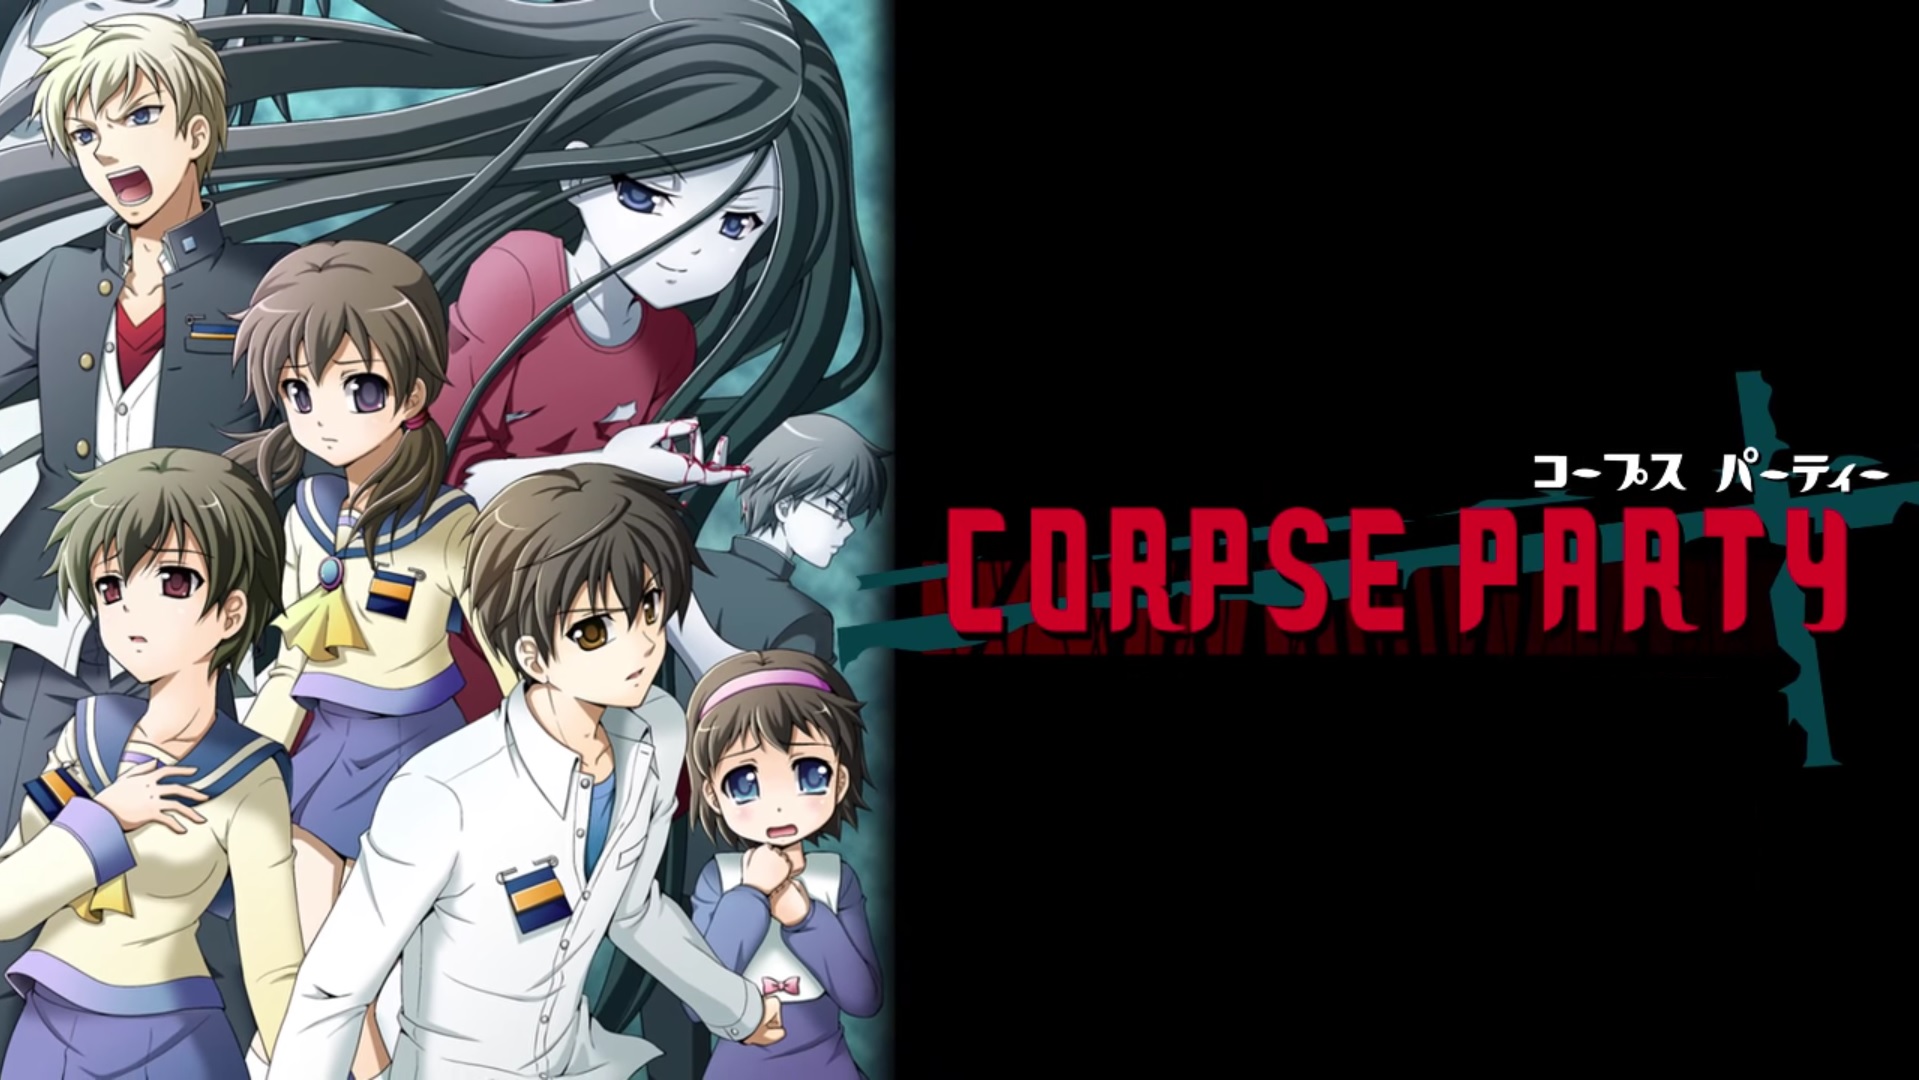 corpse-party-pc-artwork-001